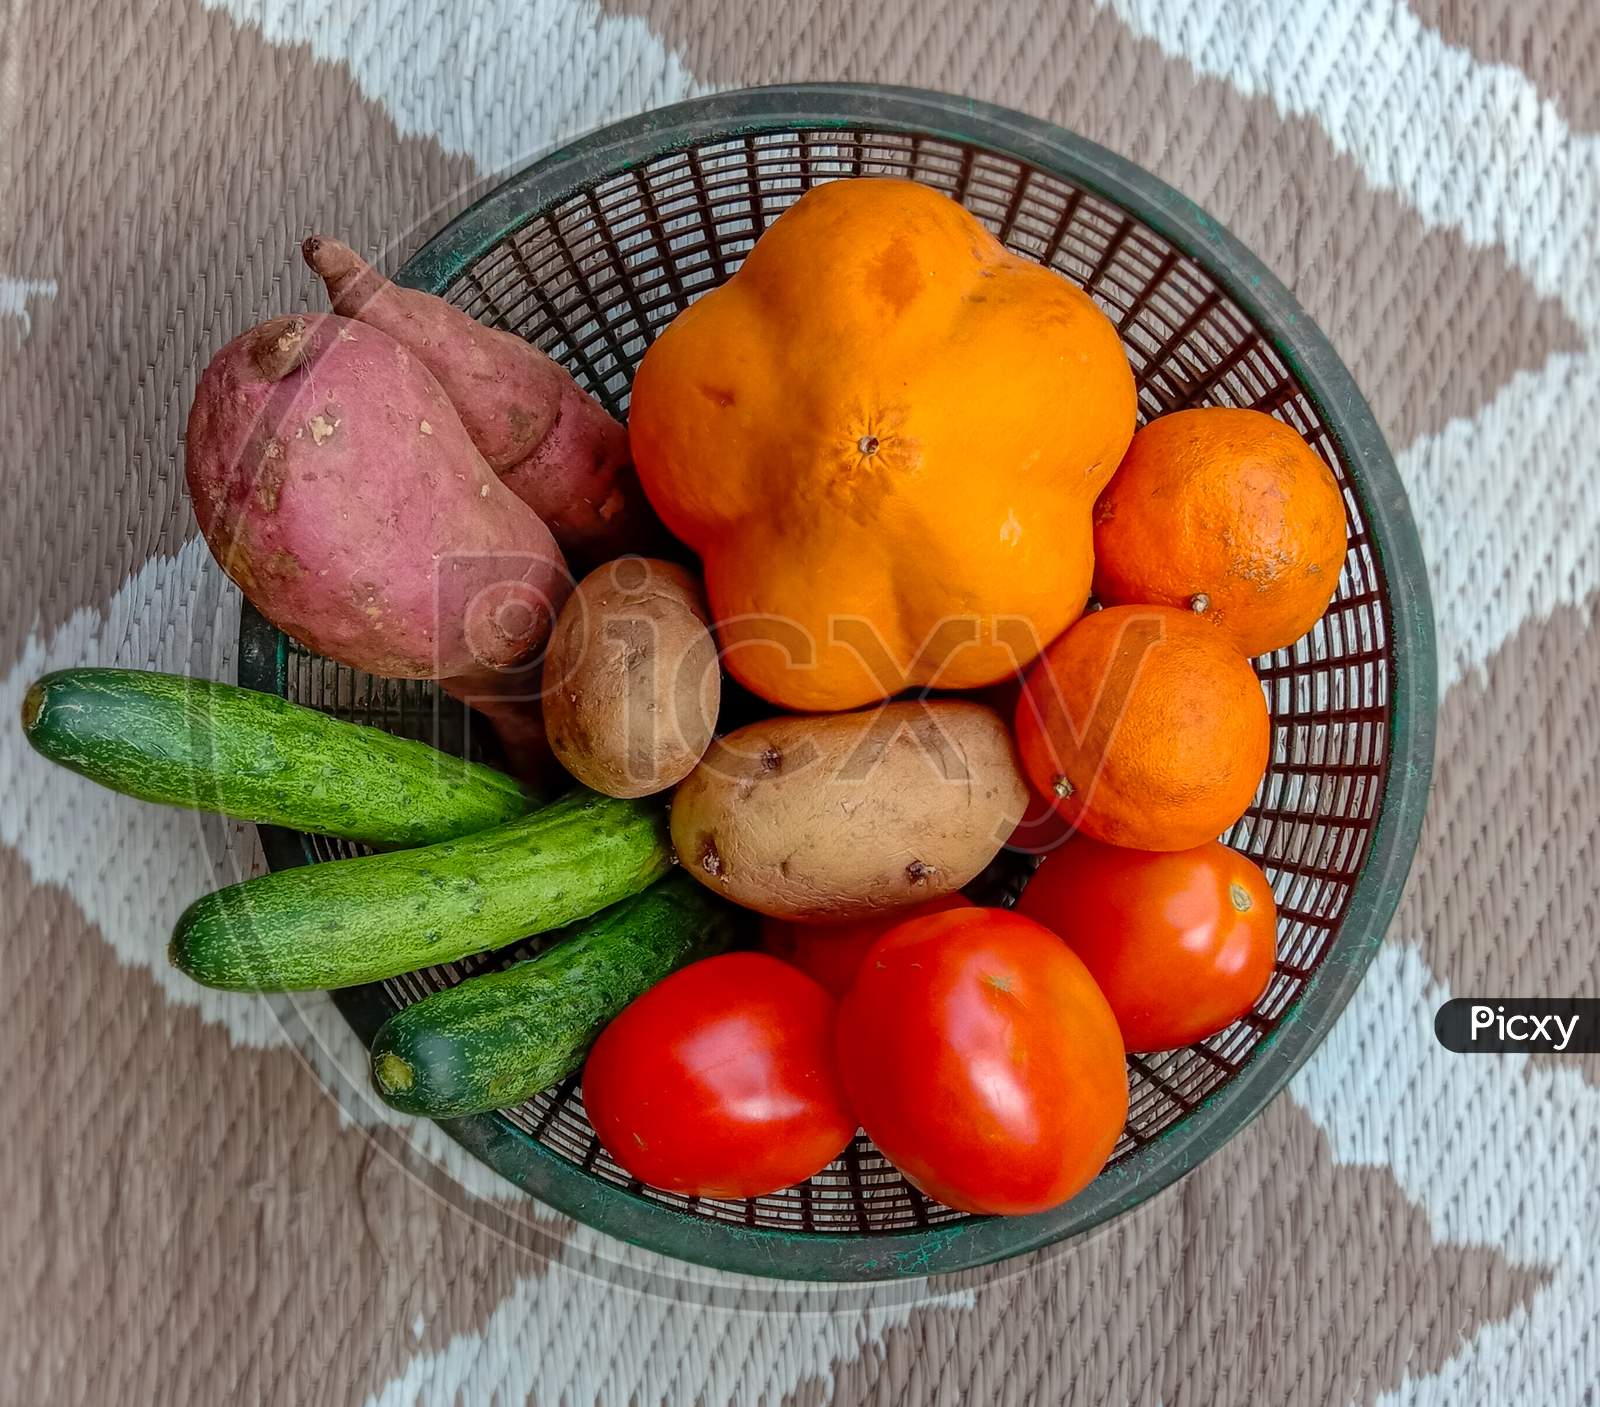 The colourful vegetables.